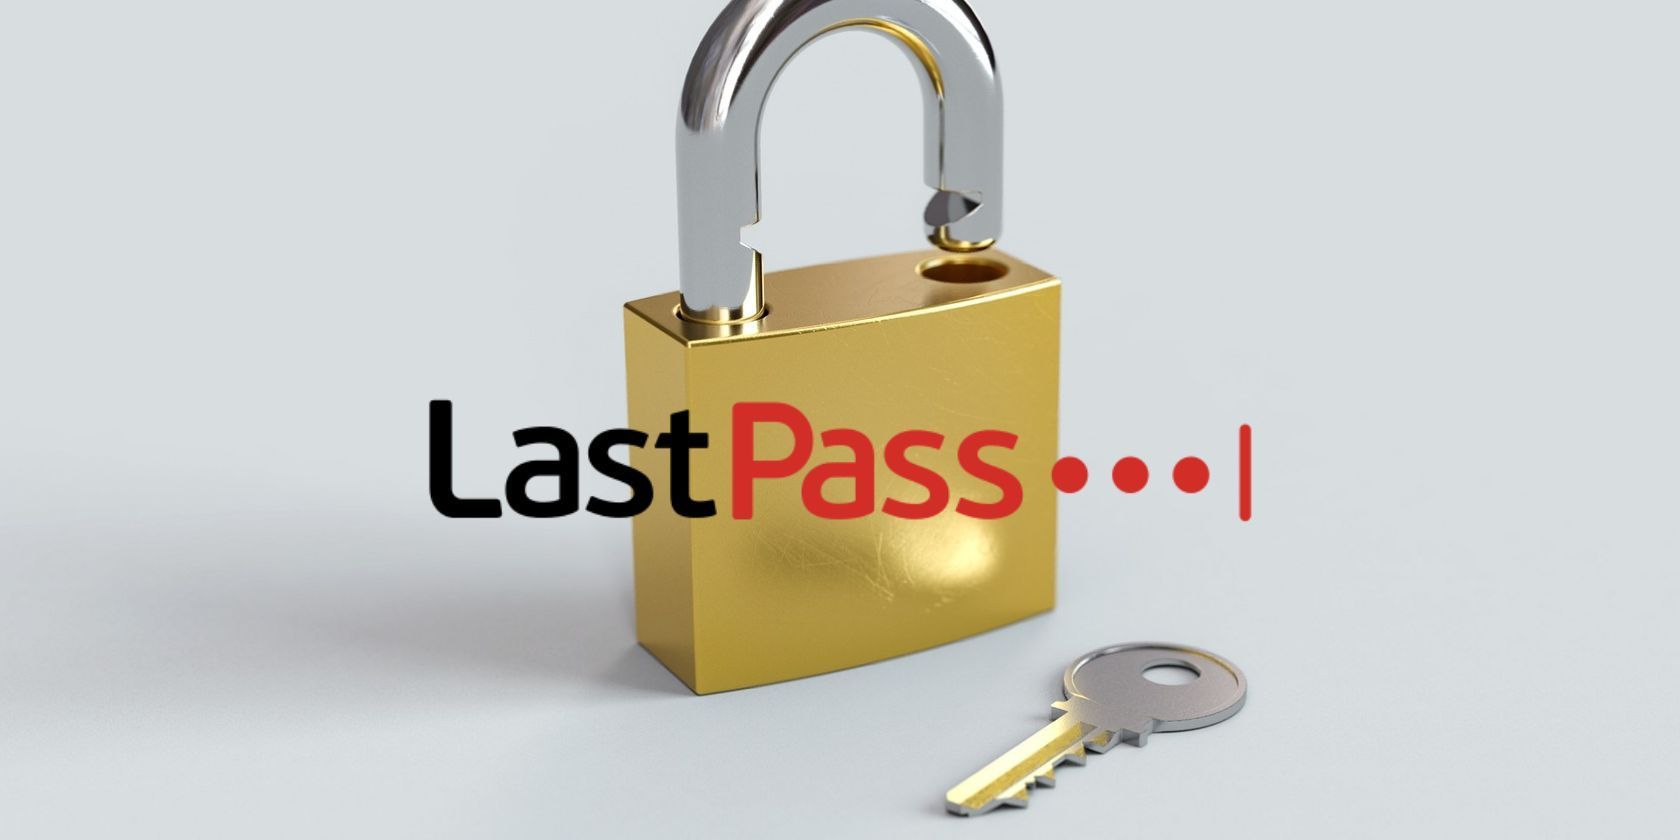 last pass logo in front of padlock and key